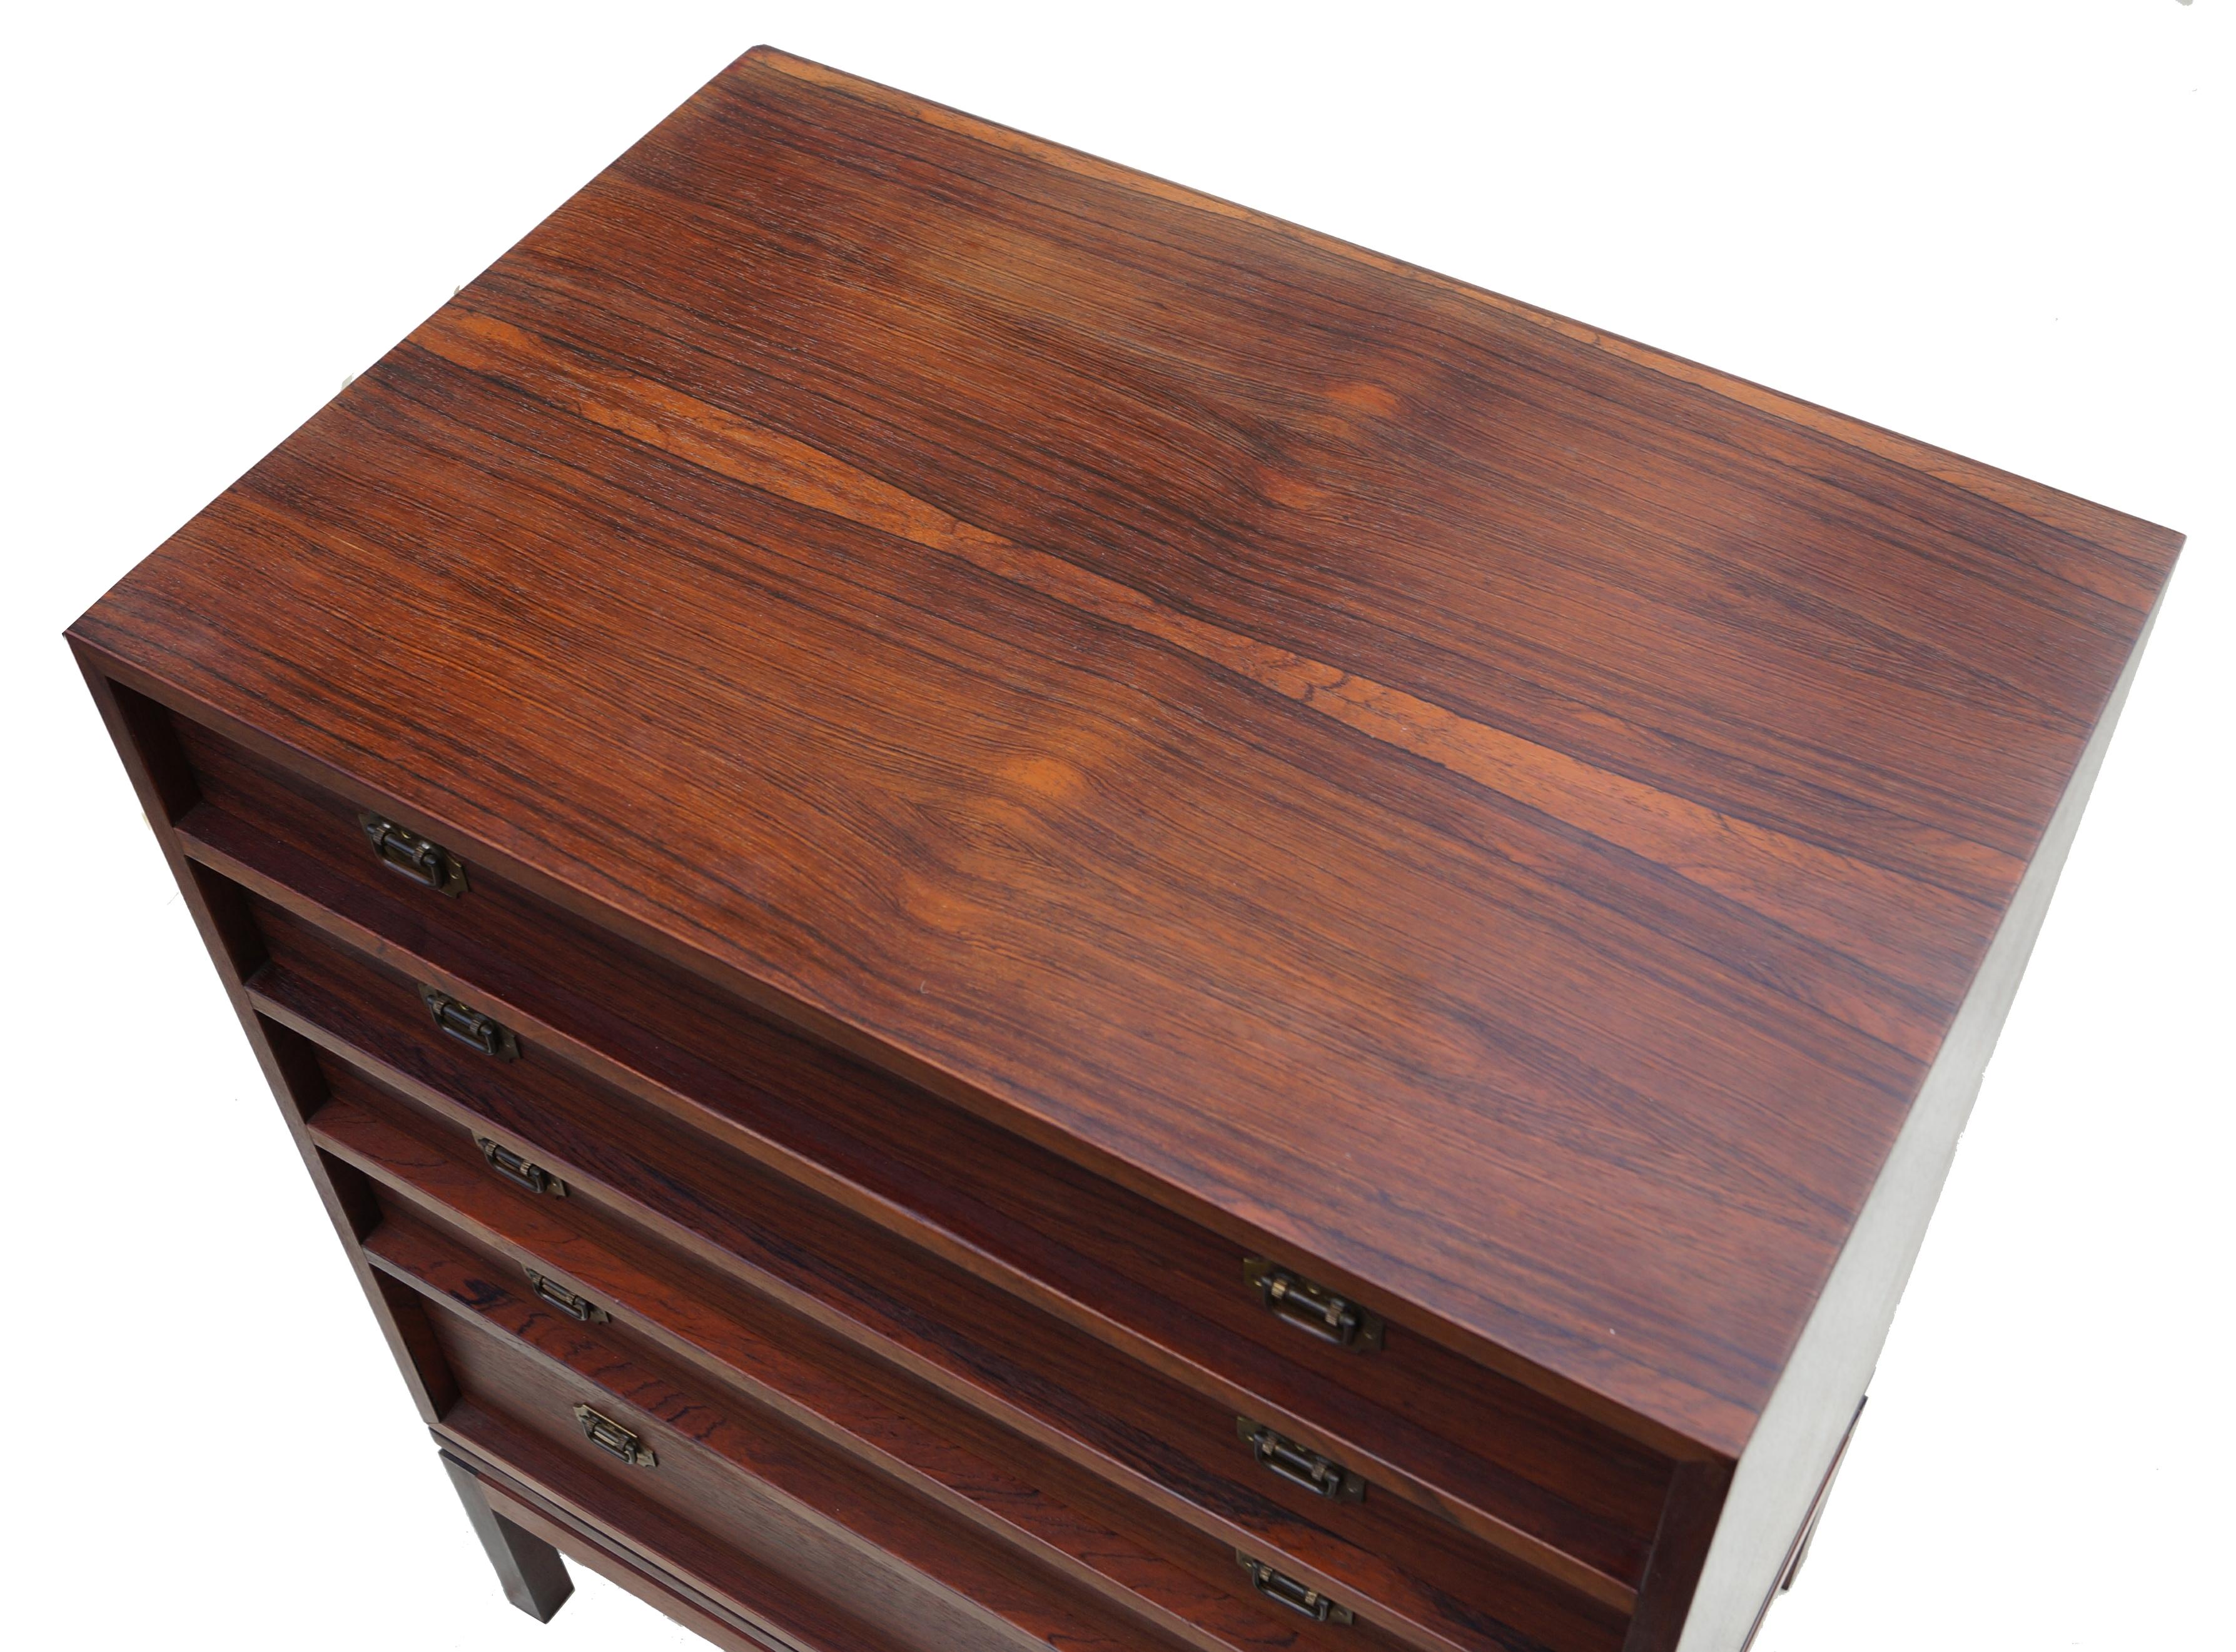 Henning Korch rosewood Campaign chest. Can have many uses.
If you are in the New Jersey , New York City Metro Area , please contact us with your delivery zip code, as we may be able to deliver curbside for less than the calculated White Glove rates